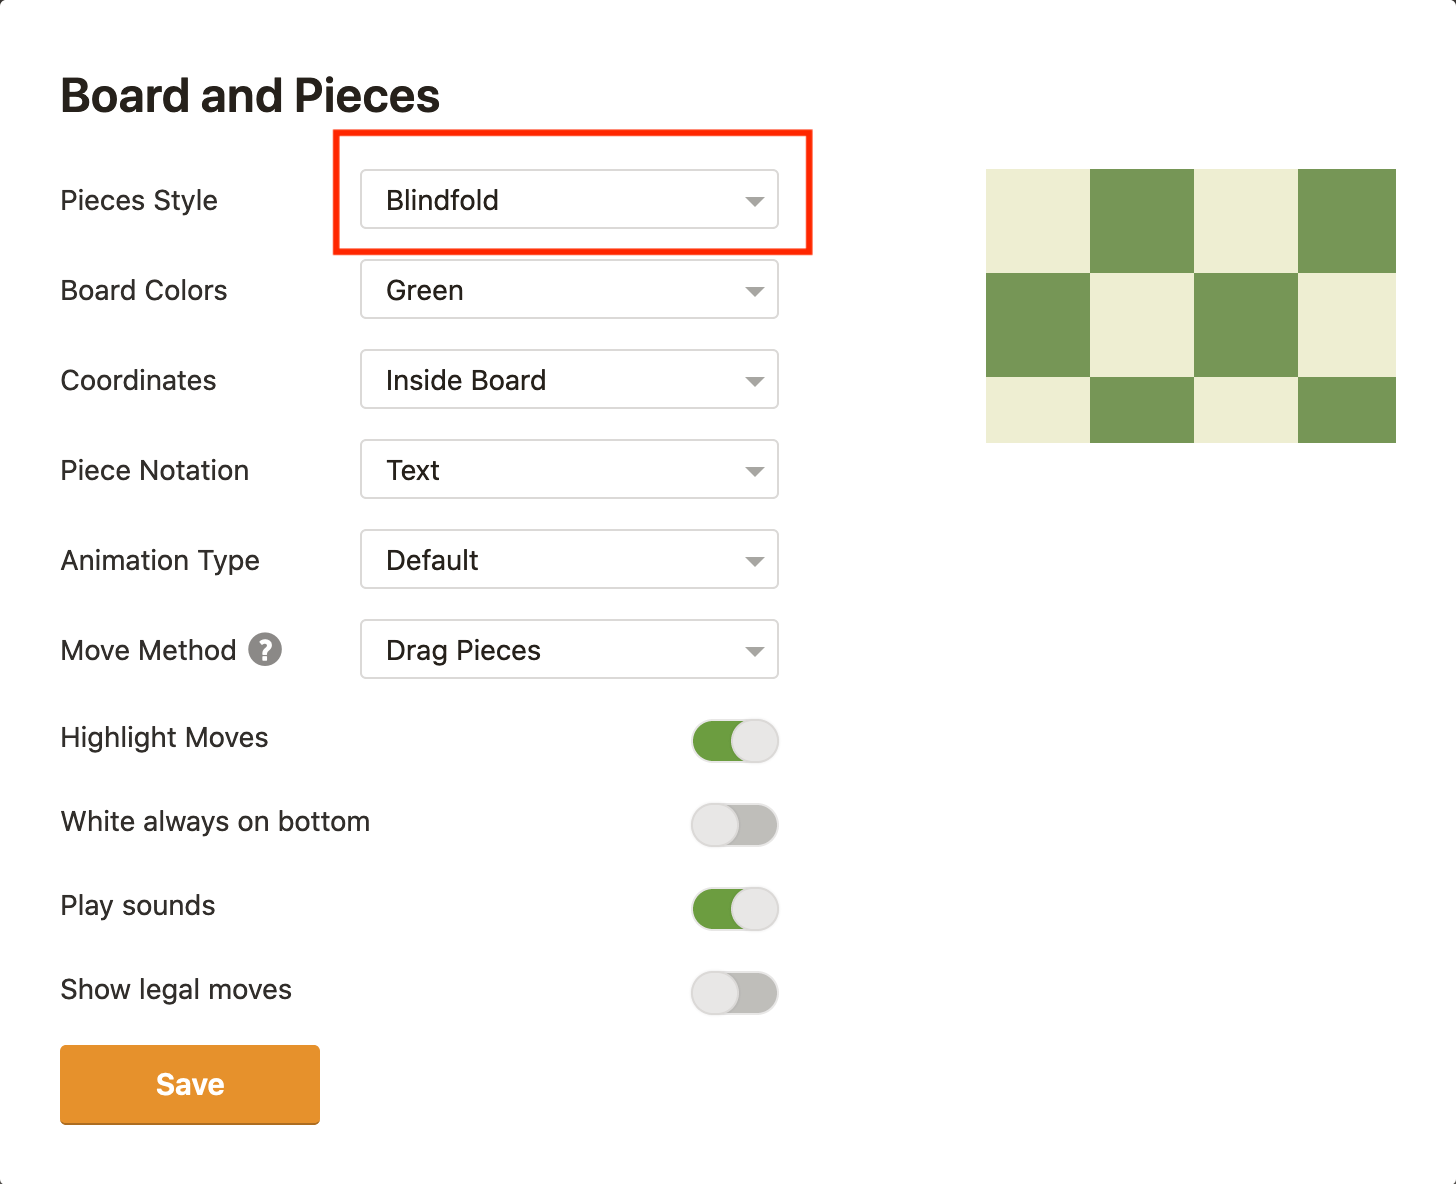 Blindfold Chess - Chess Terms 